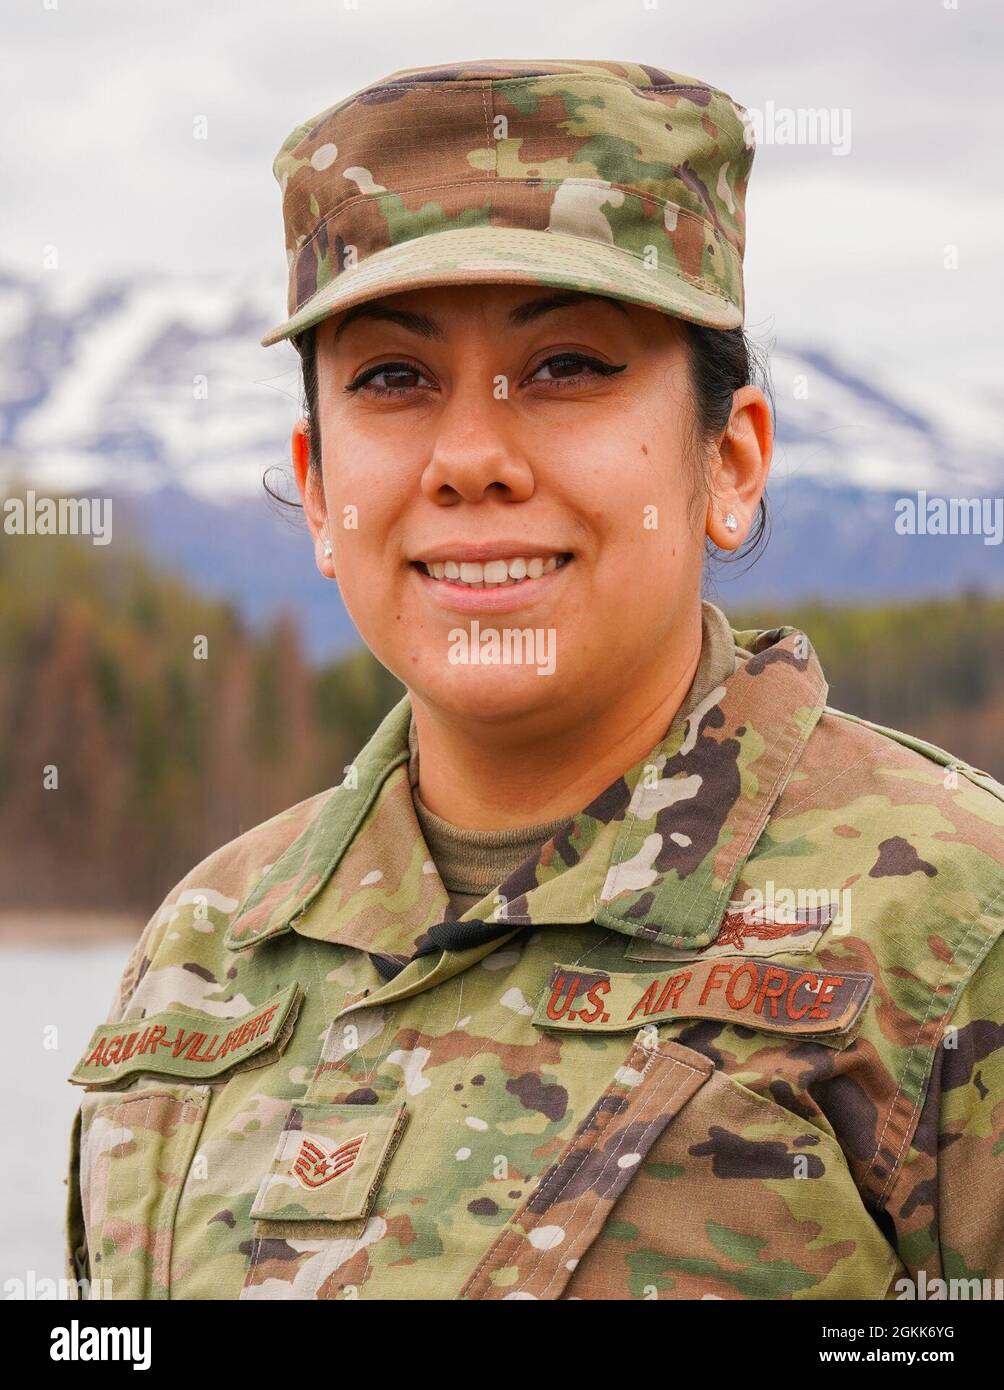 U.S. Air Force Staff Sgt. Michelle Aguilar-Villafuerte, a digital network exploit analyst with the 247th Intelligence Squadron, Tennessee Air National Guard, poses for a portrait while on temporary assignment at Joint Base Elmendorf-Richardson, Alaska, May 12, 2021. Aguilar-Villafuerte was in Alaska to learn new skills and support active-duty operations at JBER. Stock Photo